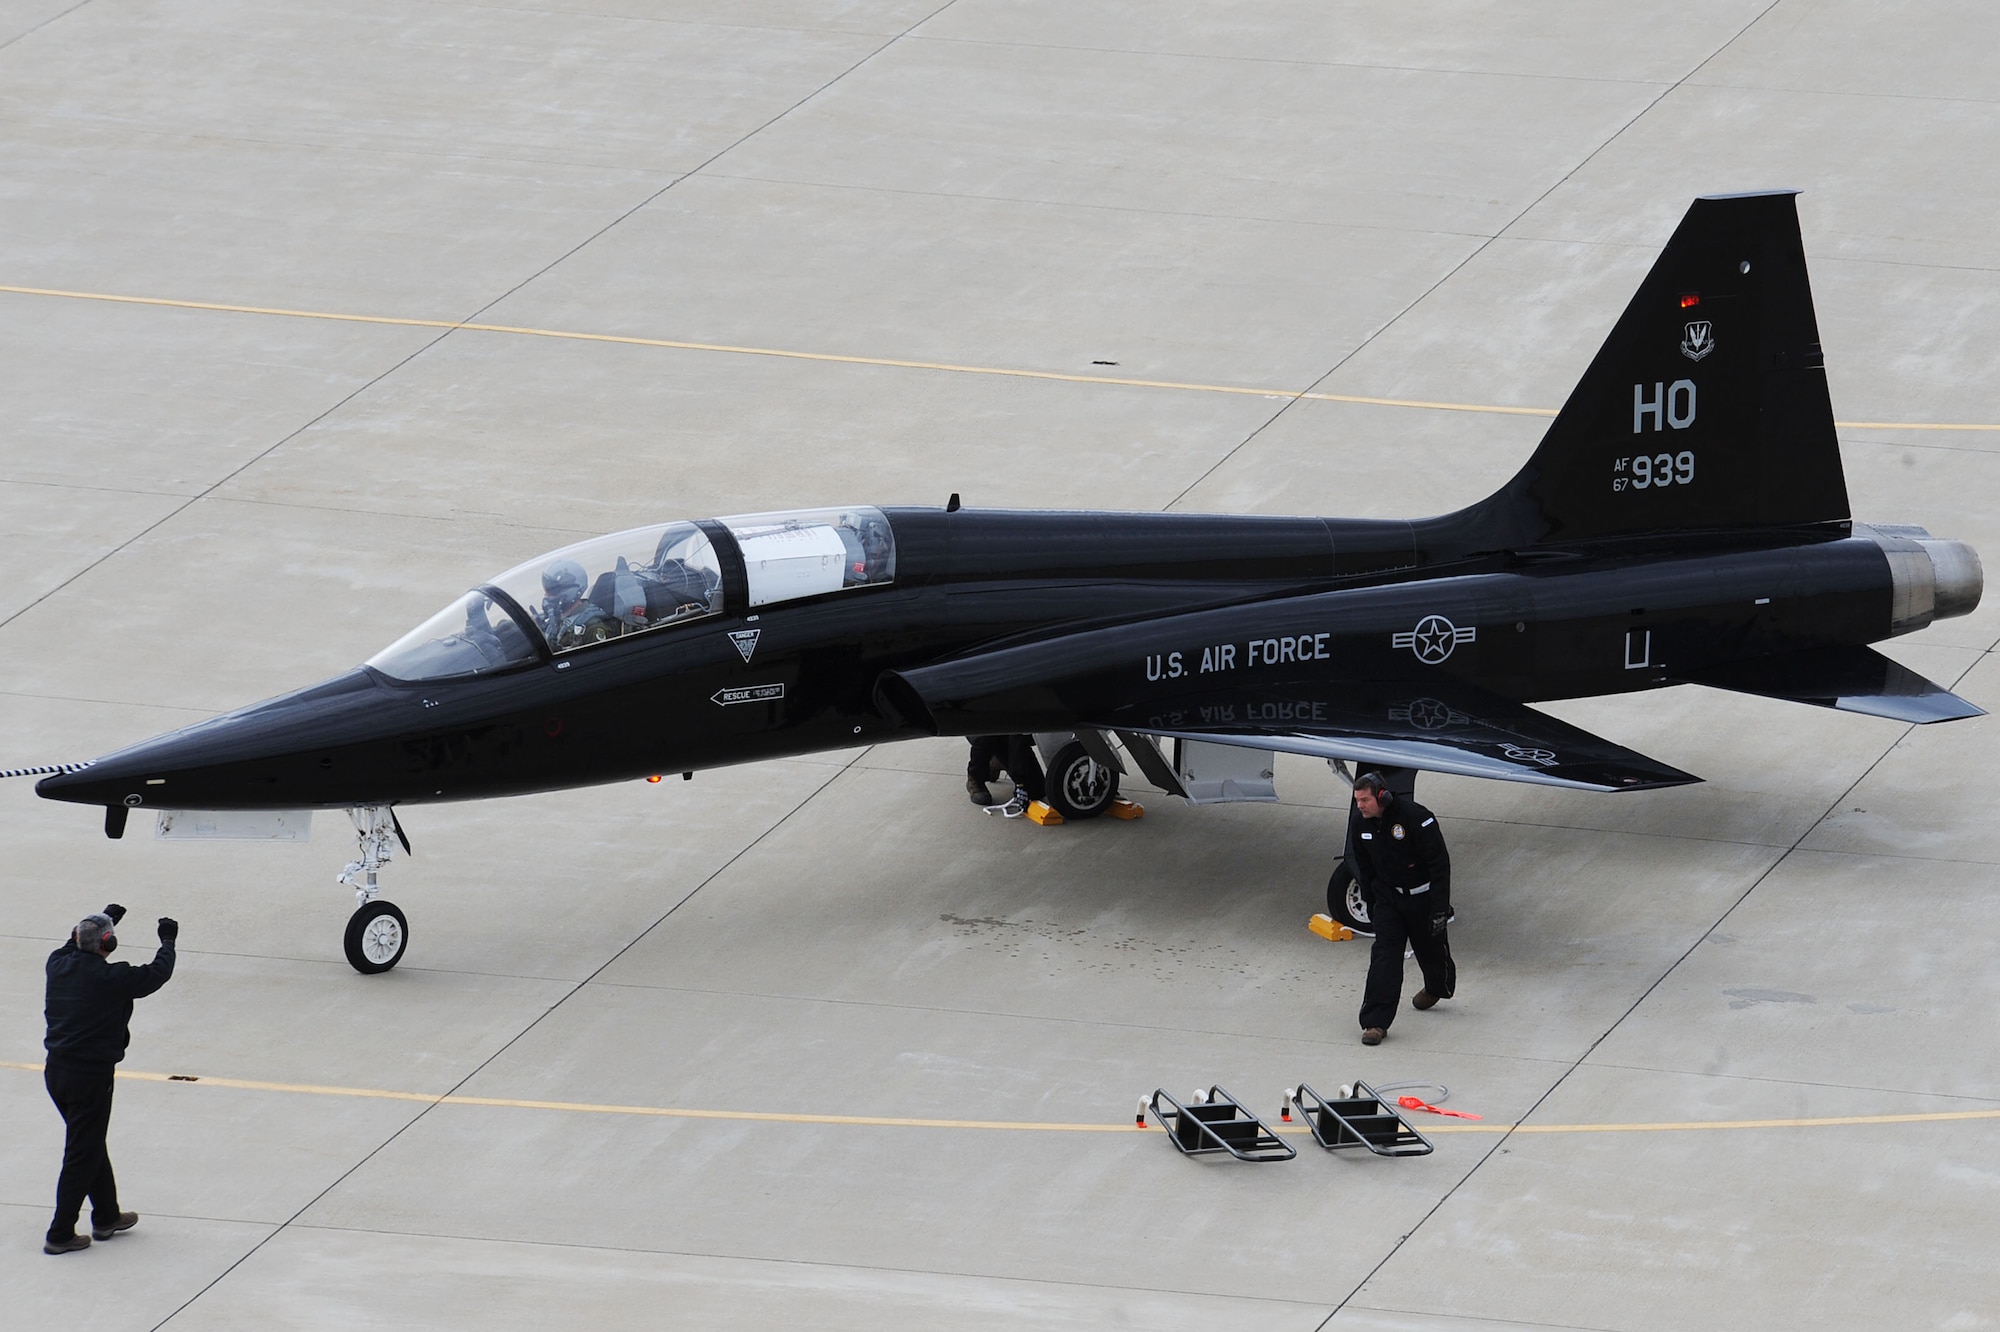 A T-38 Talon arrives at Langley AFB, Va., April 1, 2011 from Holloman Air Force Base, N.M. The aircraft, flown by Col. Kevin Mastin, 1st Fighter Wing vice commander, is temporarily assigned to the 1st Fighter Wing to support combat readiness training for the pilots. (U.S. Air Force photo by Senior Airman Brian Ybarbo/Released)

   